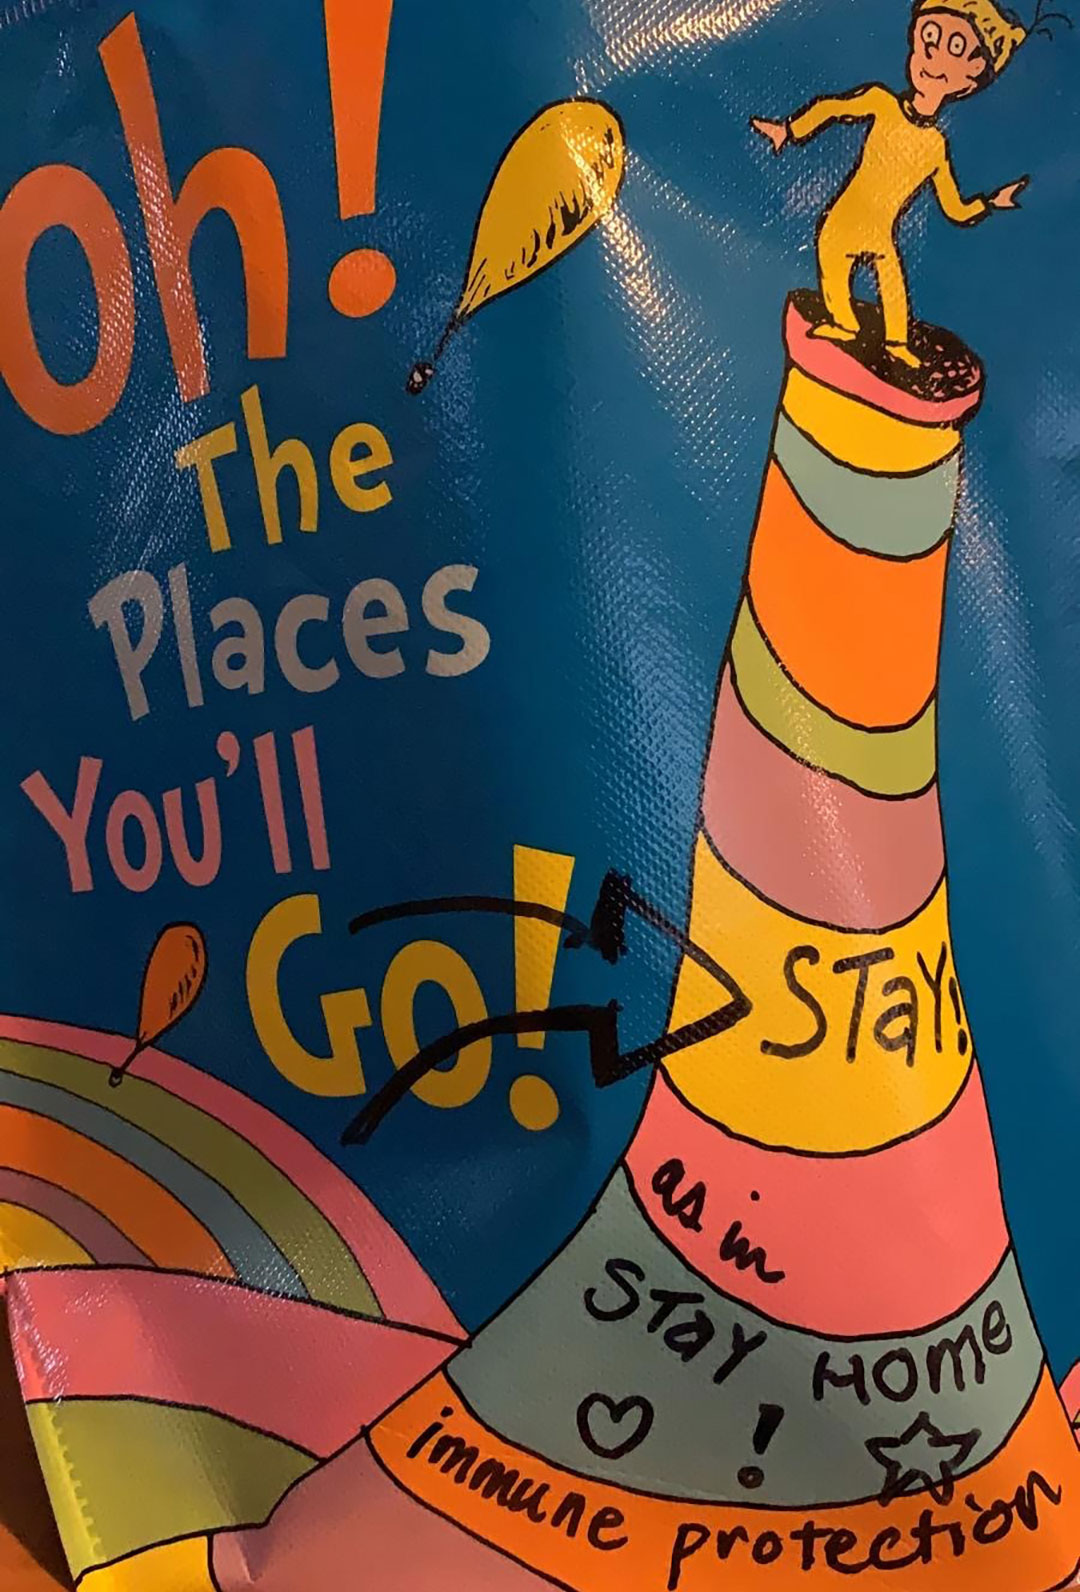 Oh! The places you'll go!